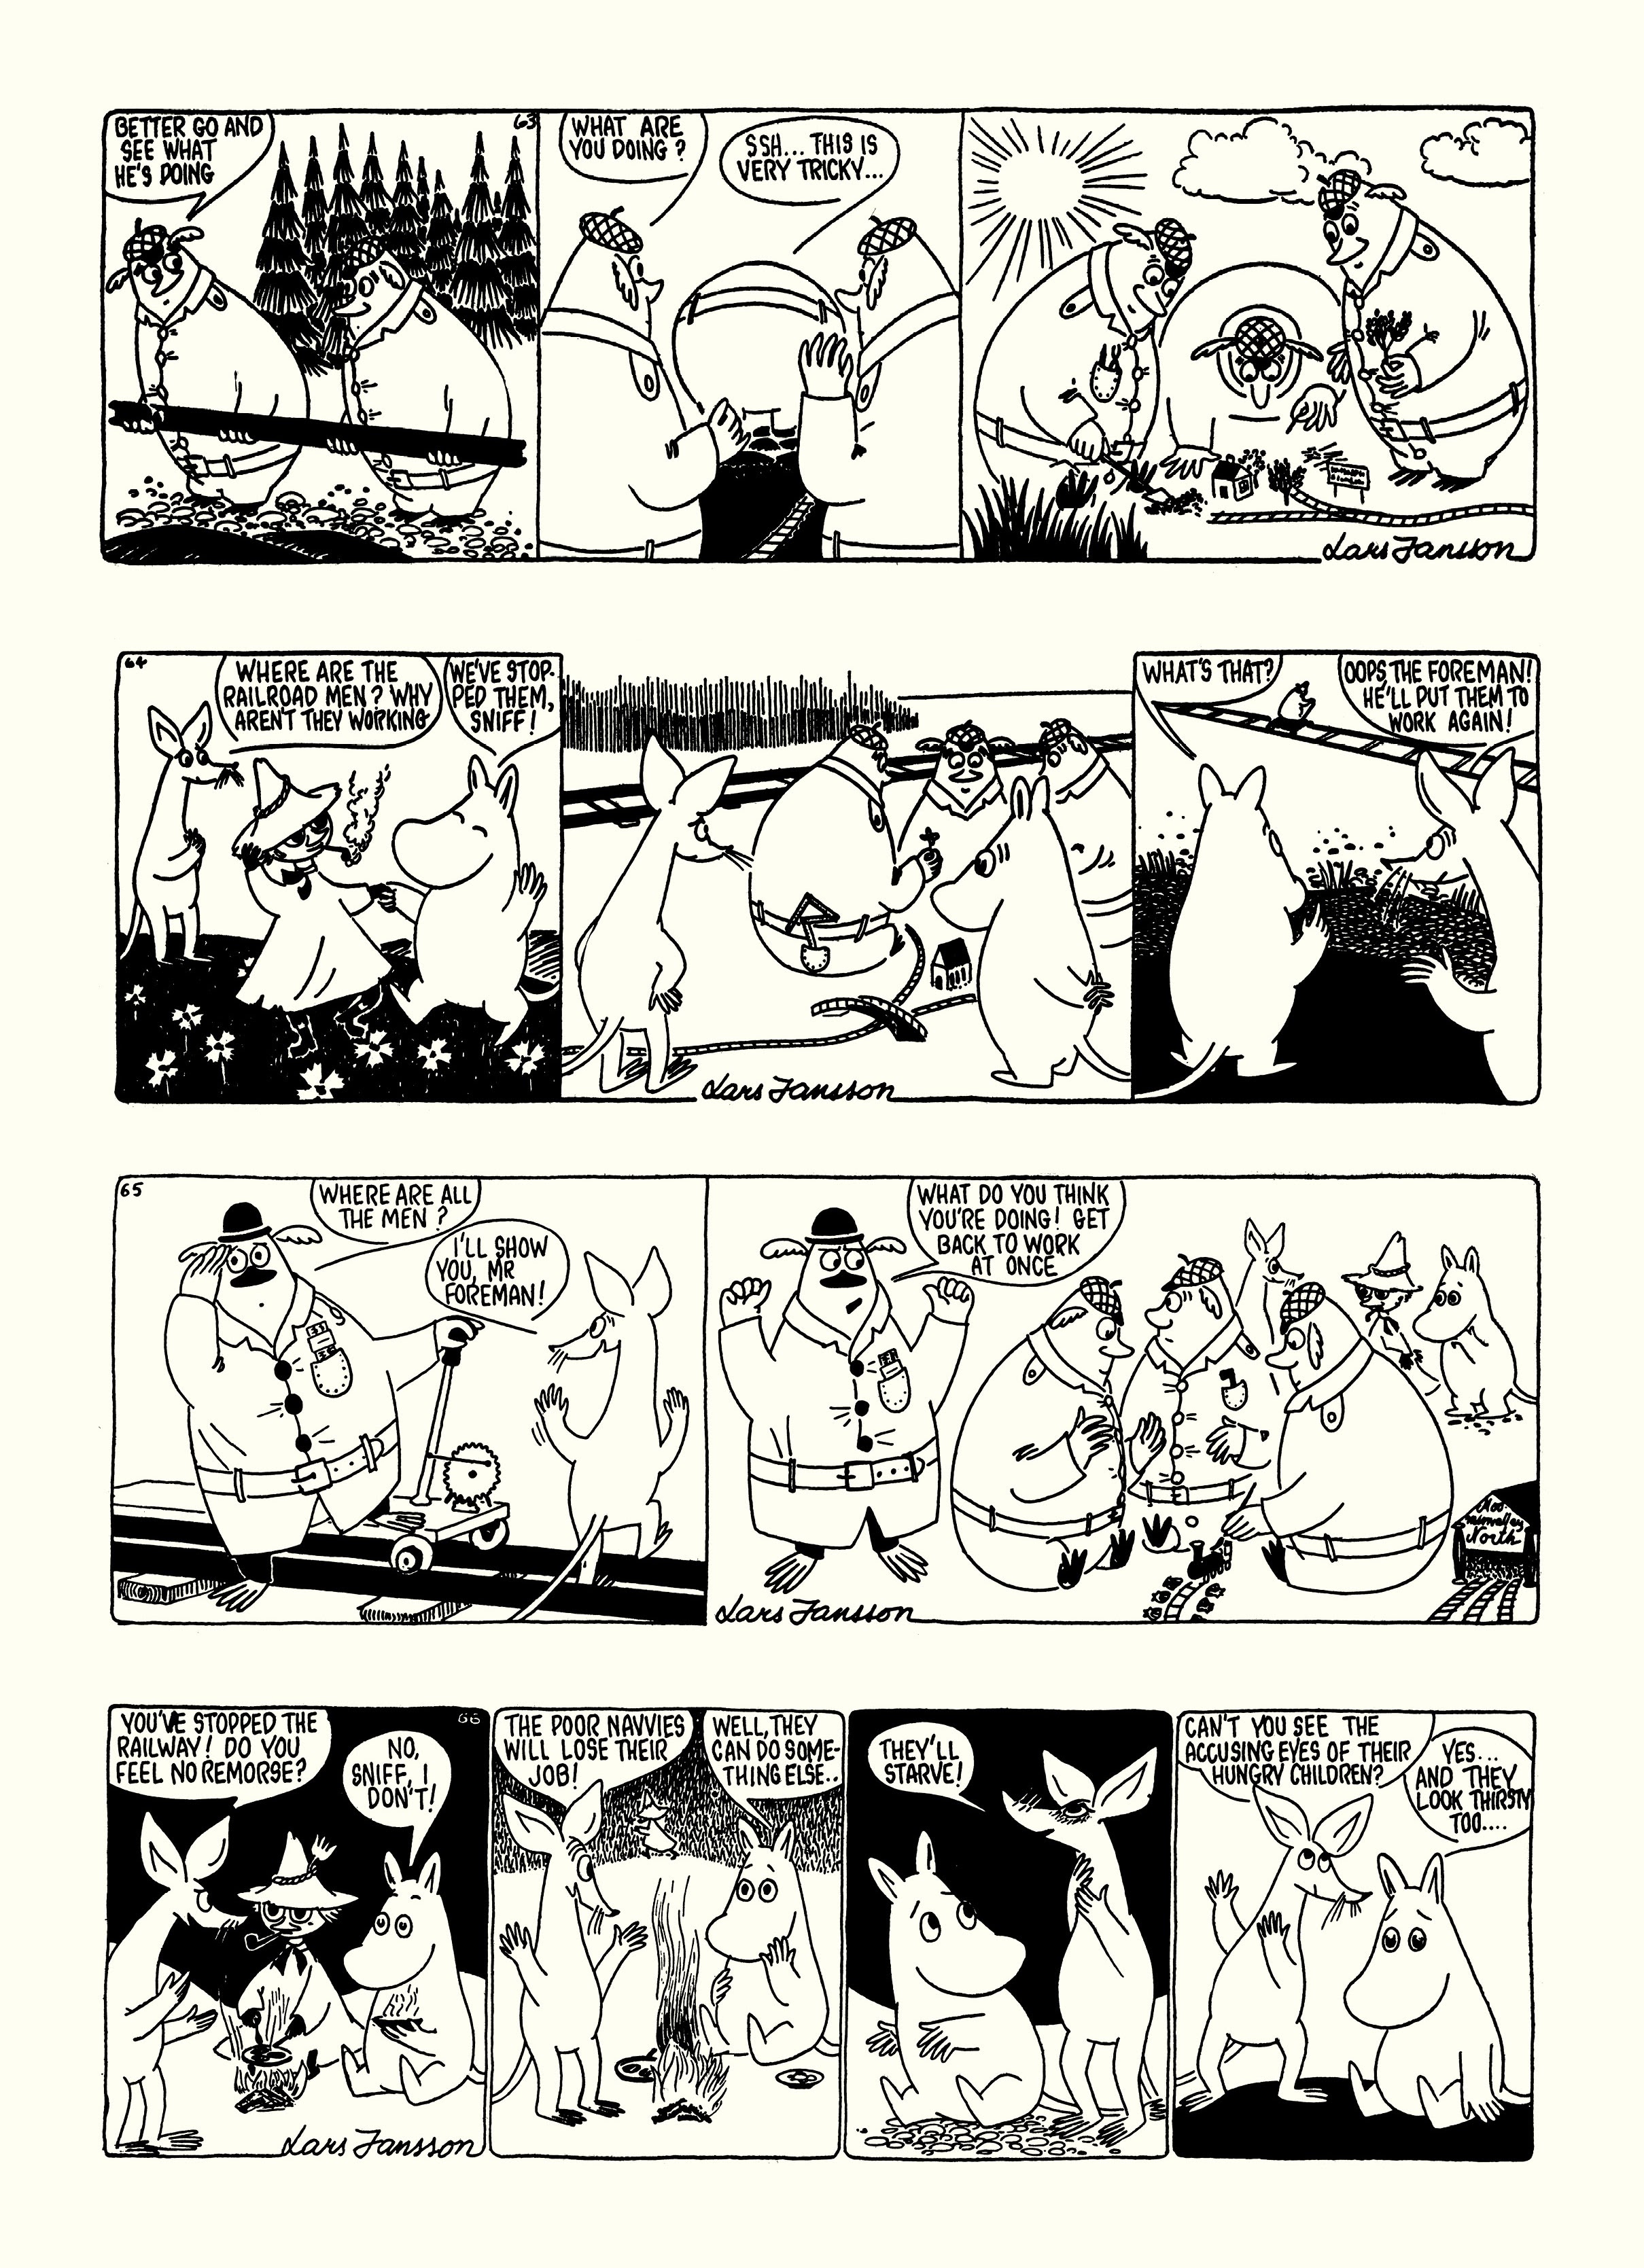 Read online Moomin: The Complete Lars Jansson Comic Strip comic -  Issue # TPB 6 - 42